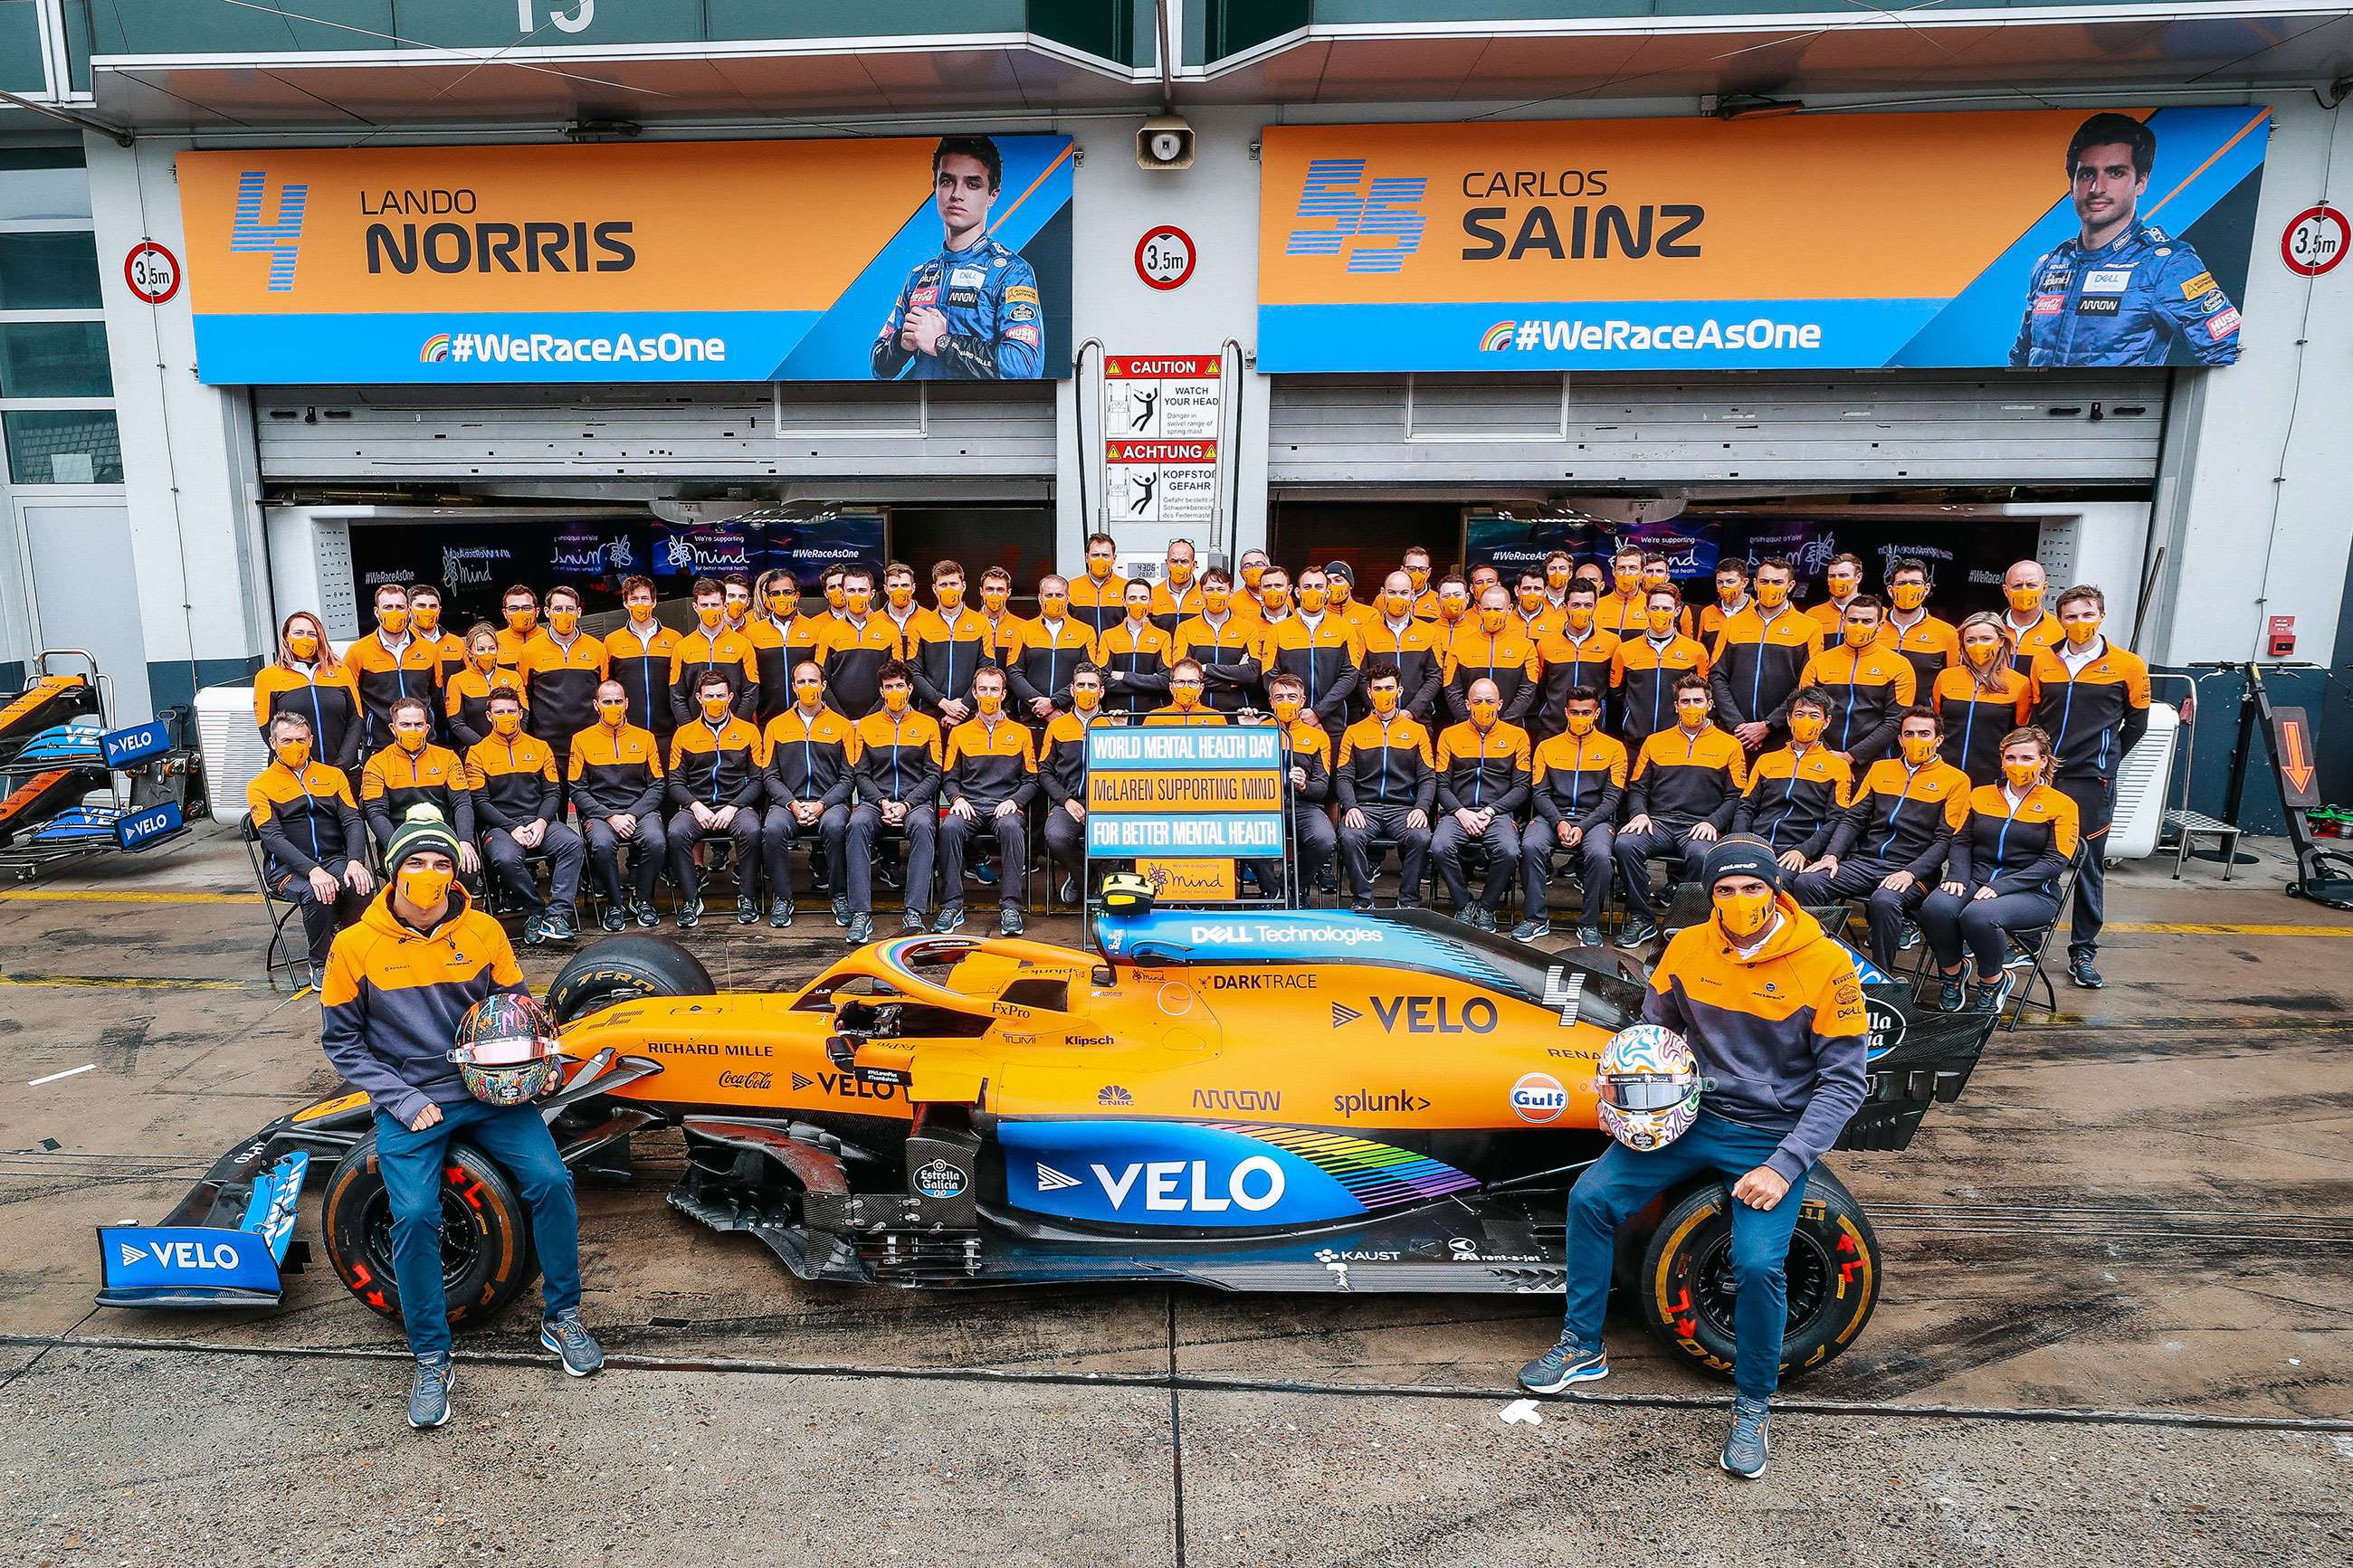 Norris, ex-team-mate Carlos Sainz Jr. and the McLaren team in 2020, having partnered with Mind. 